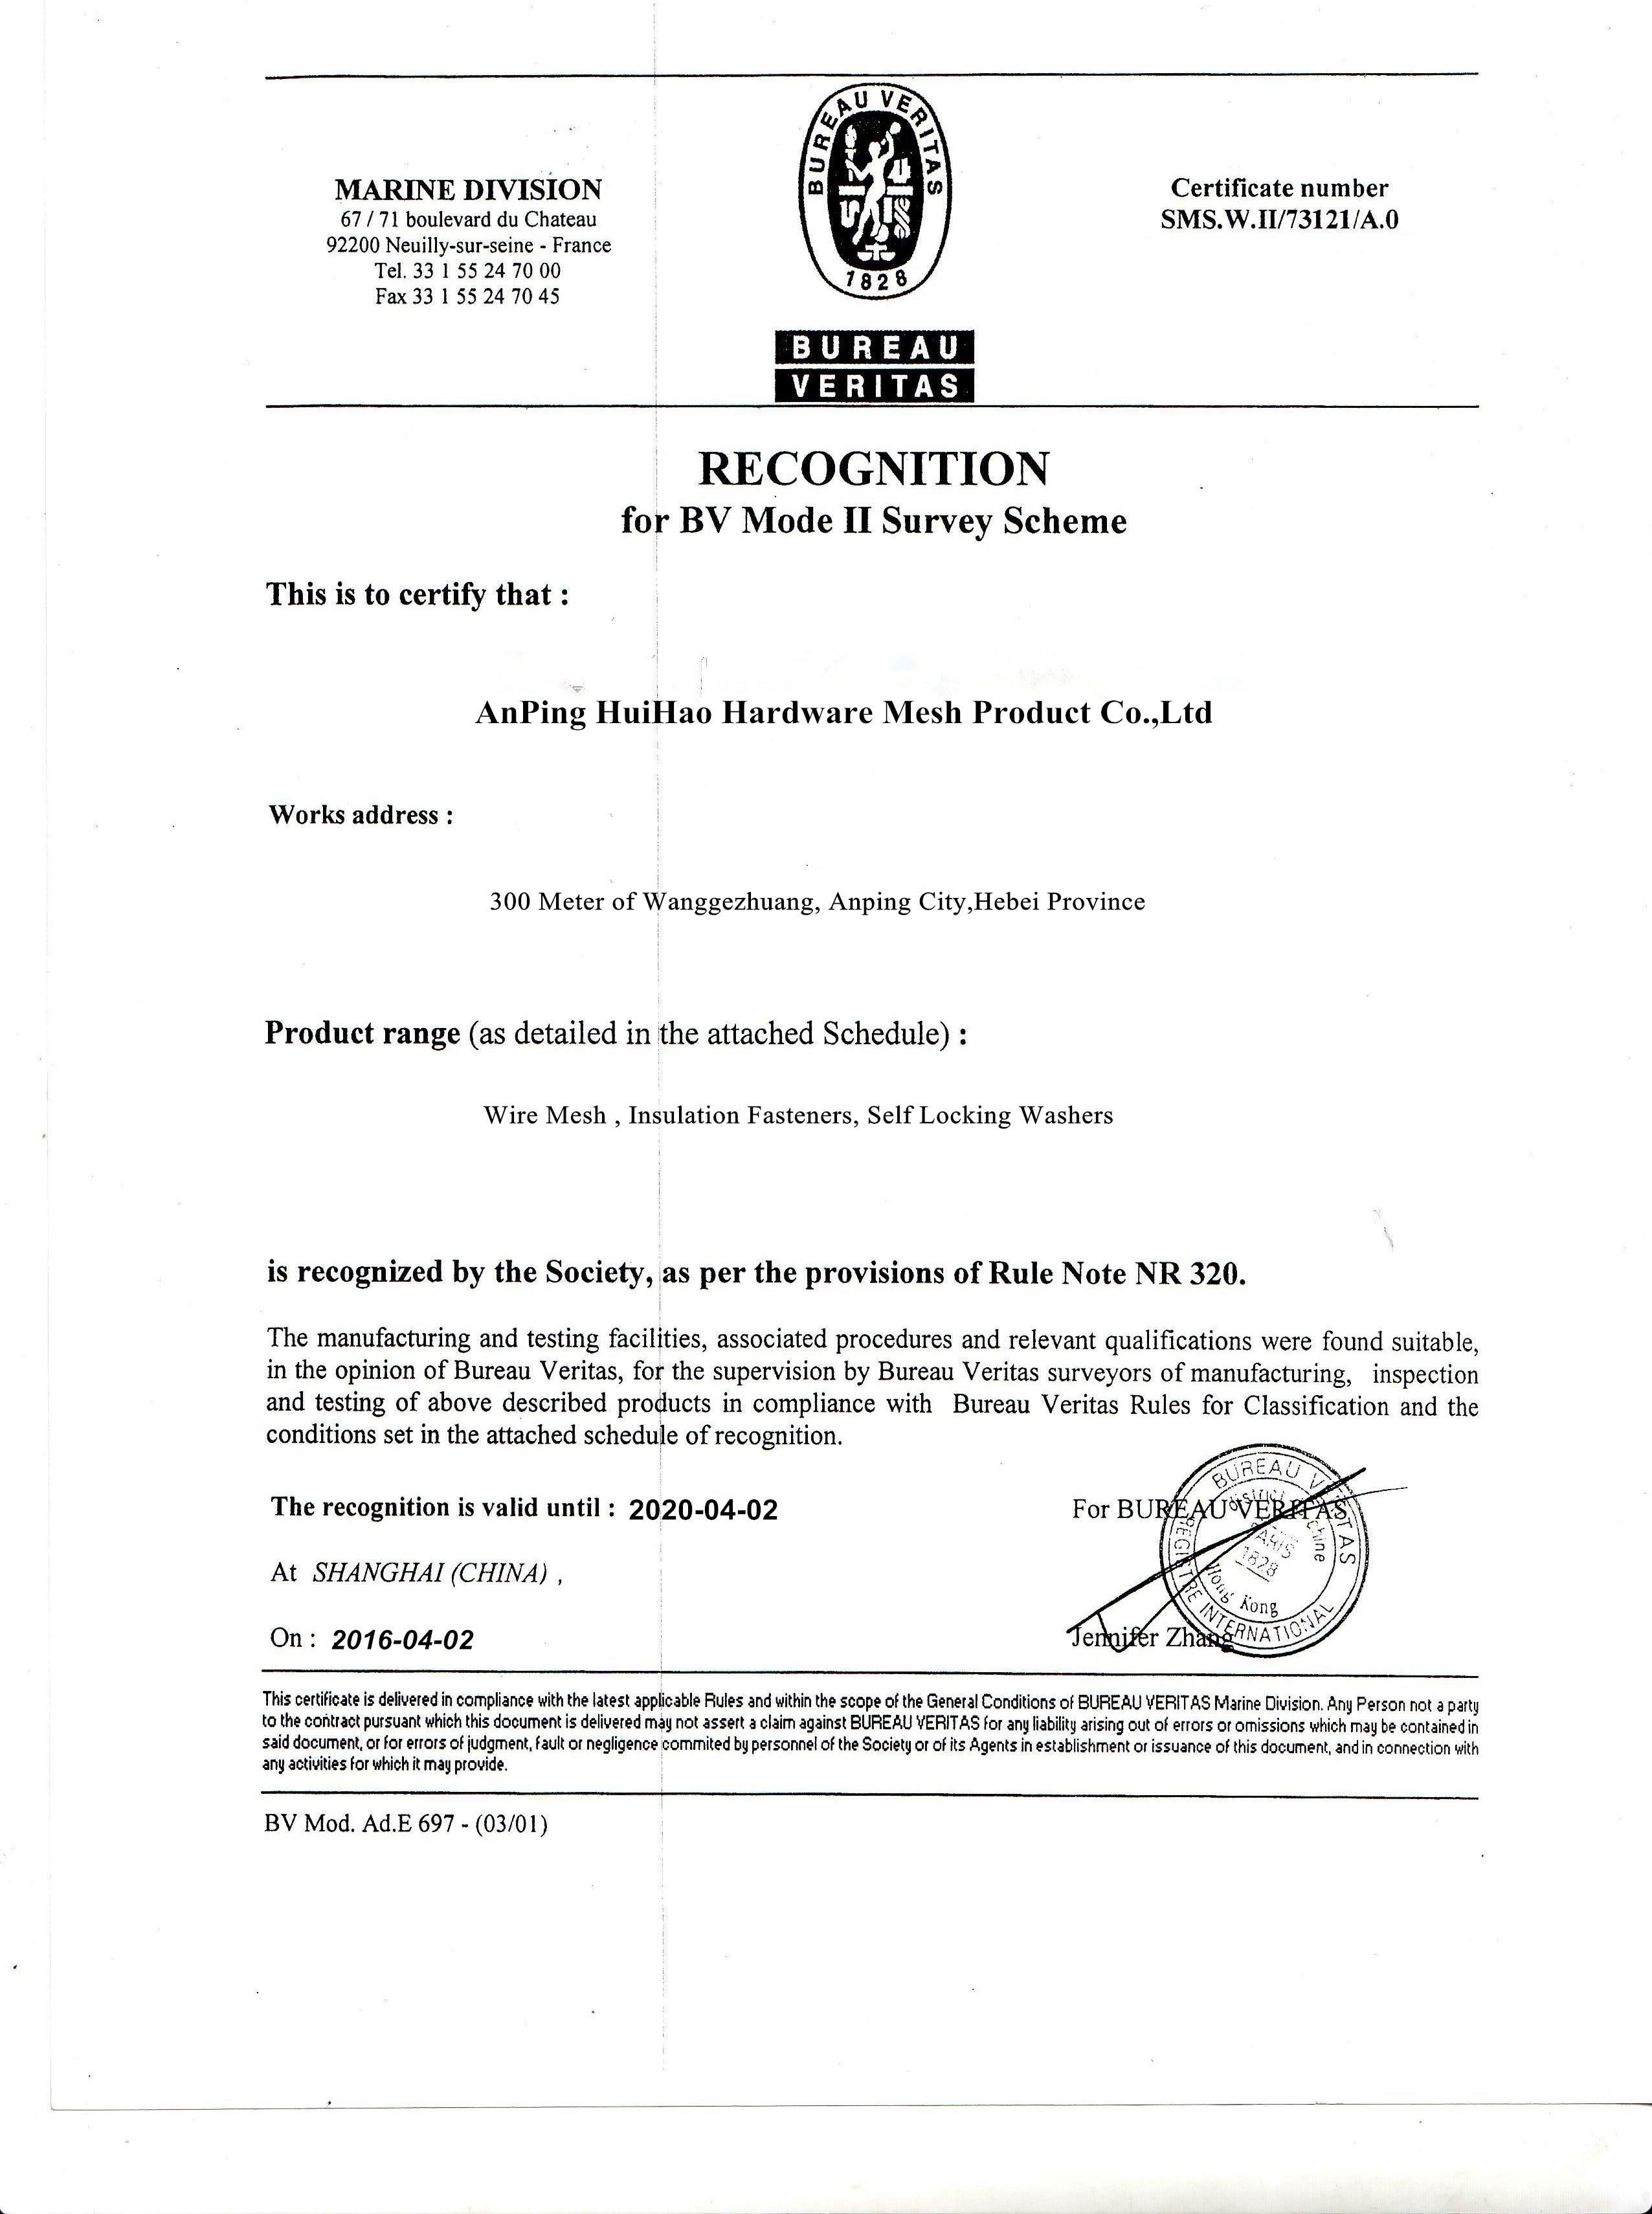 Huihao Hardware Mesh Product Limited Certifications